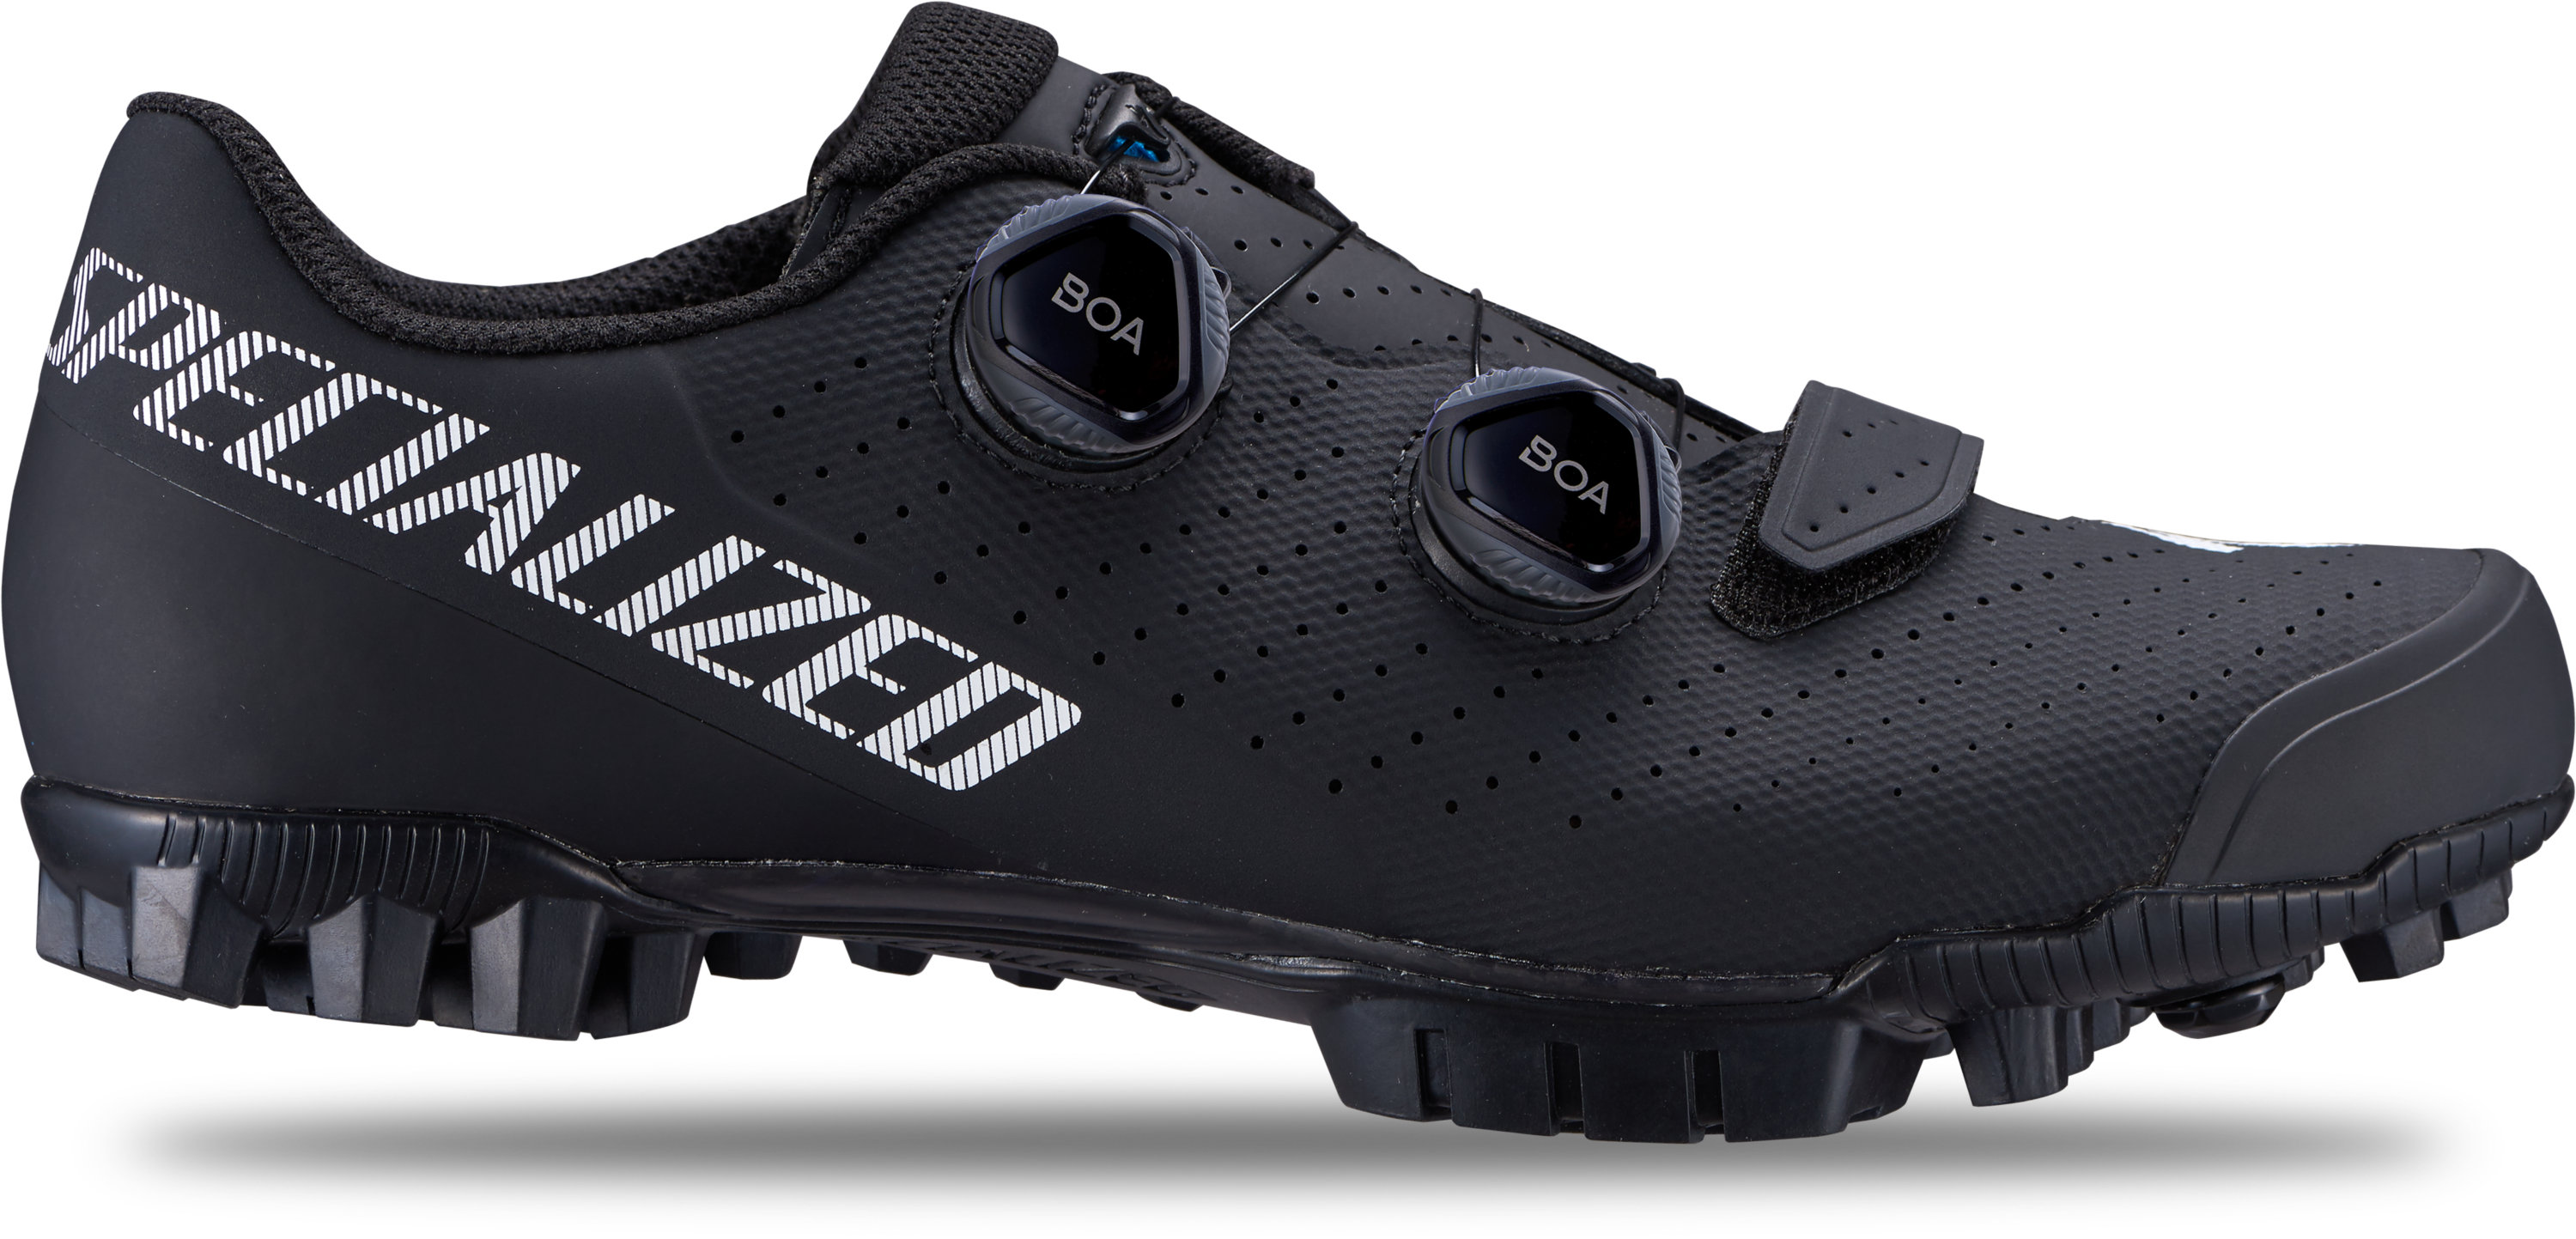 specialized mtb shoes 2020